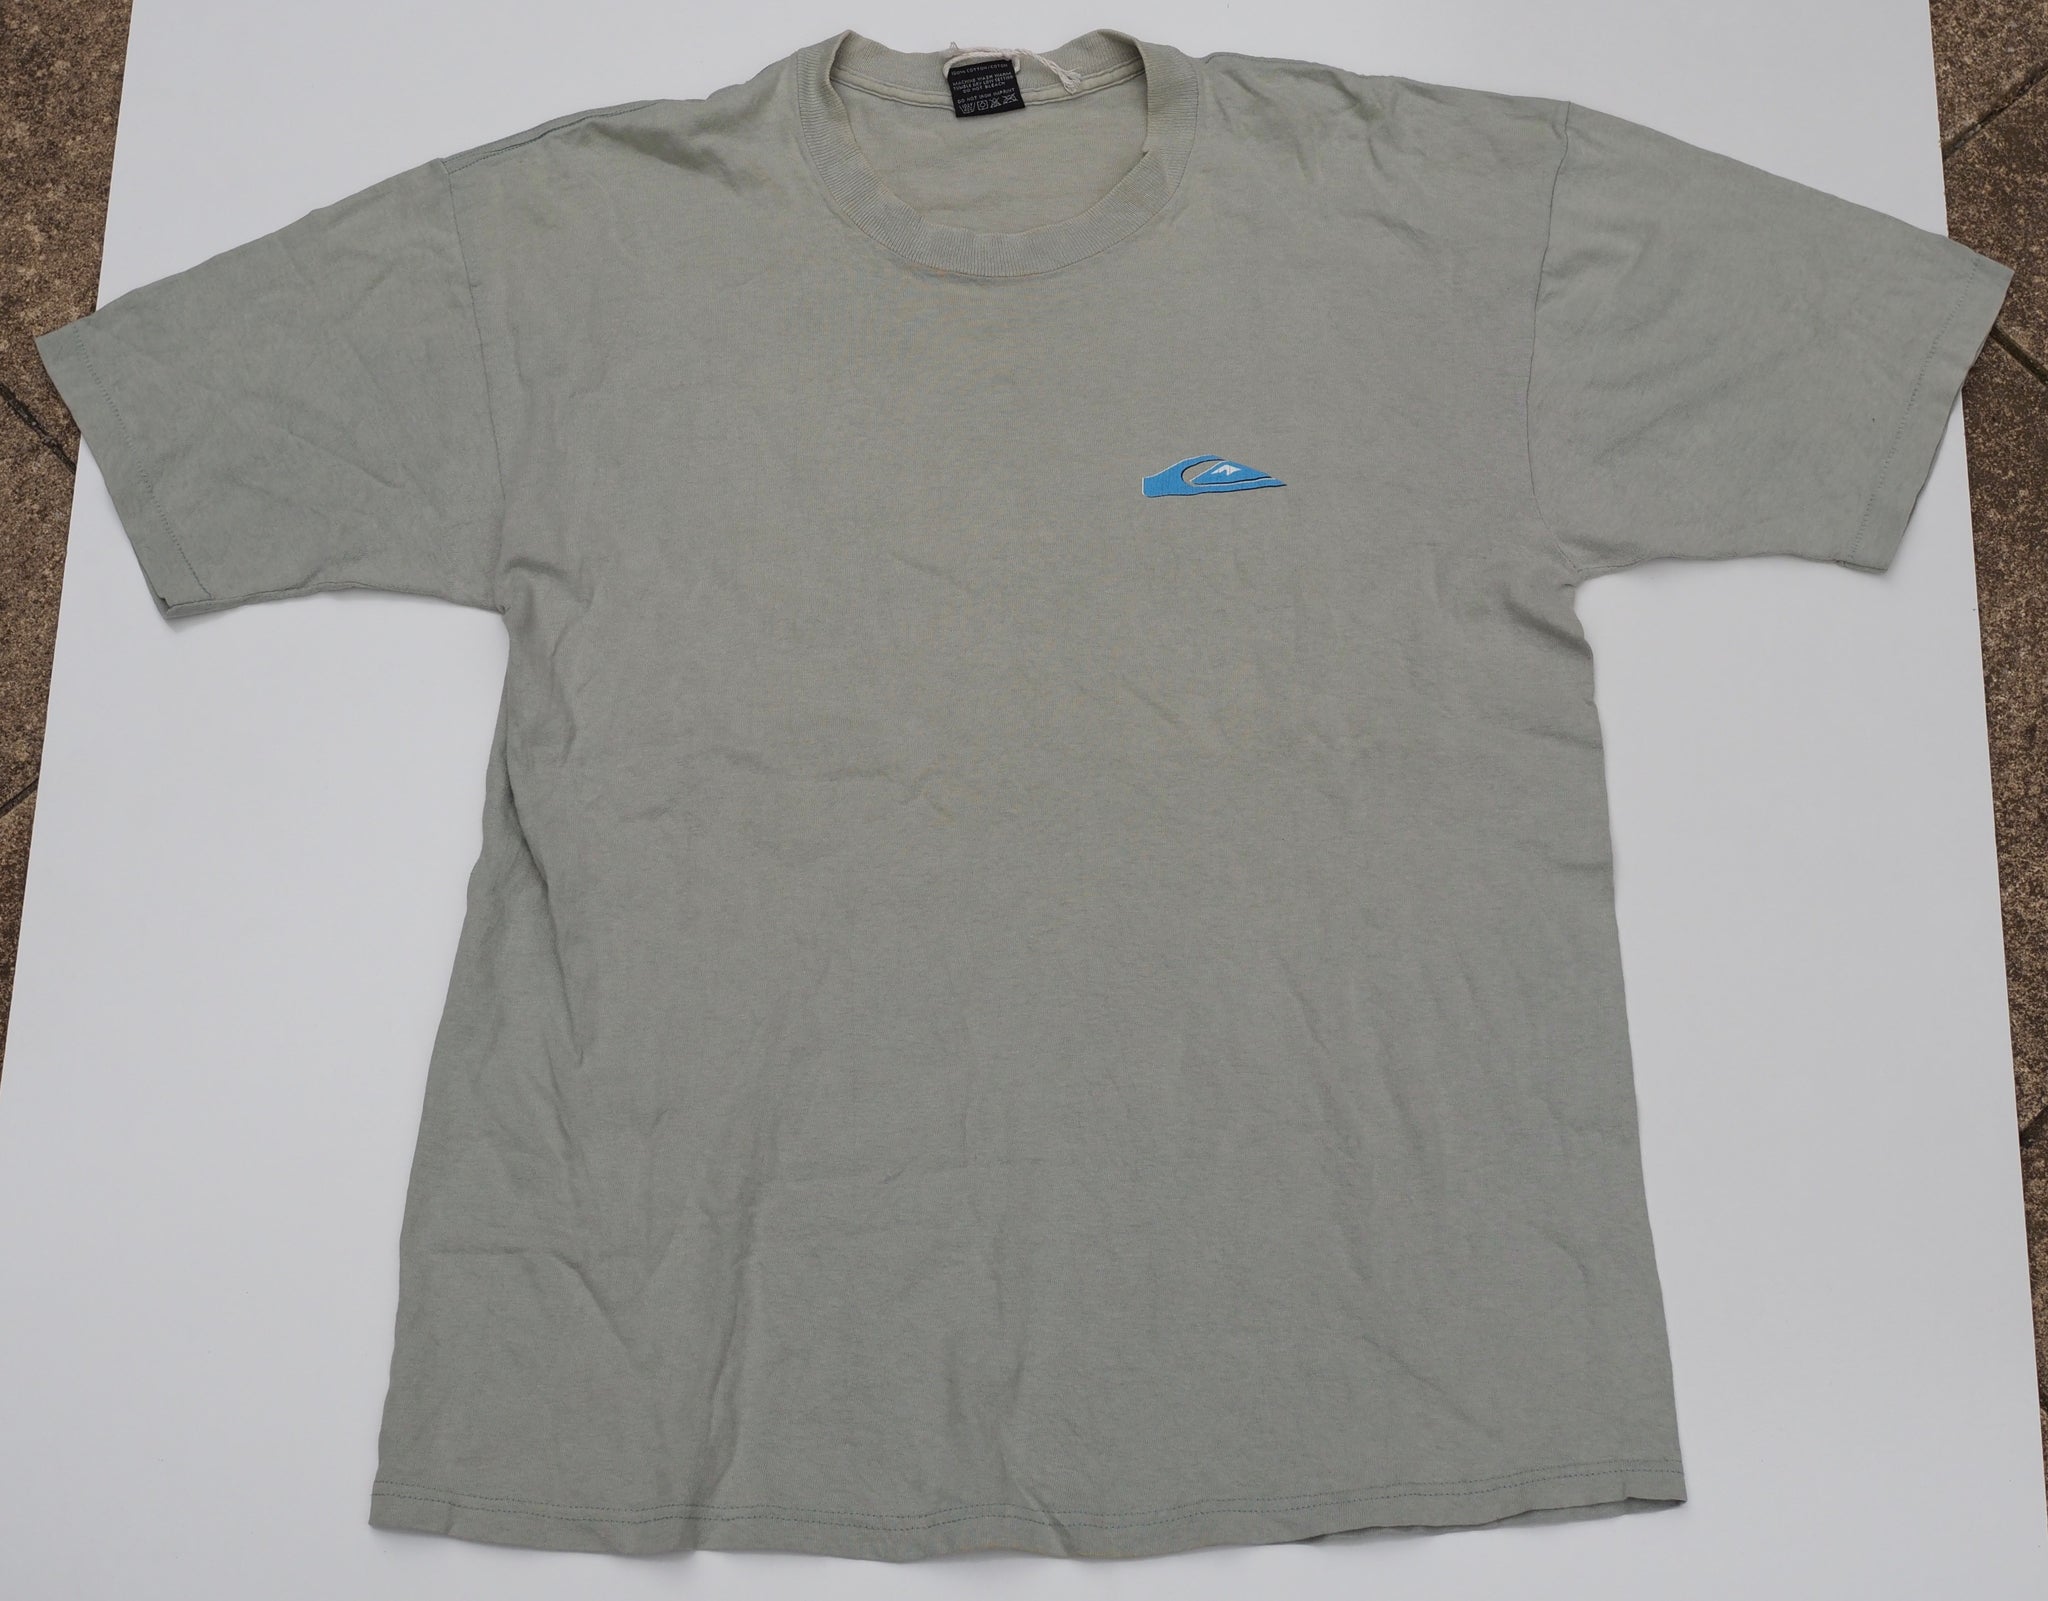 90’s Quicksilver T-shirt with Blue back graphic